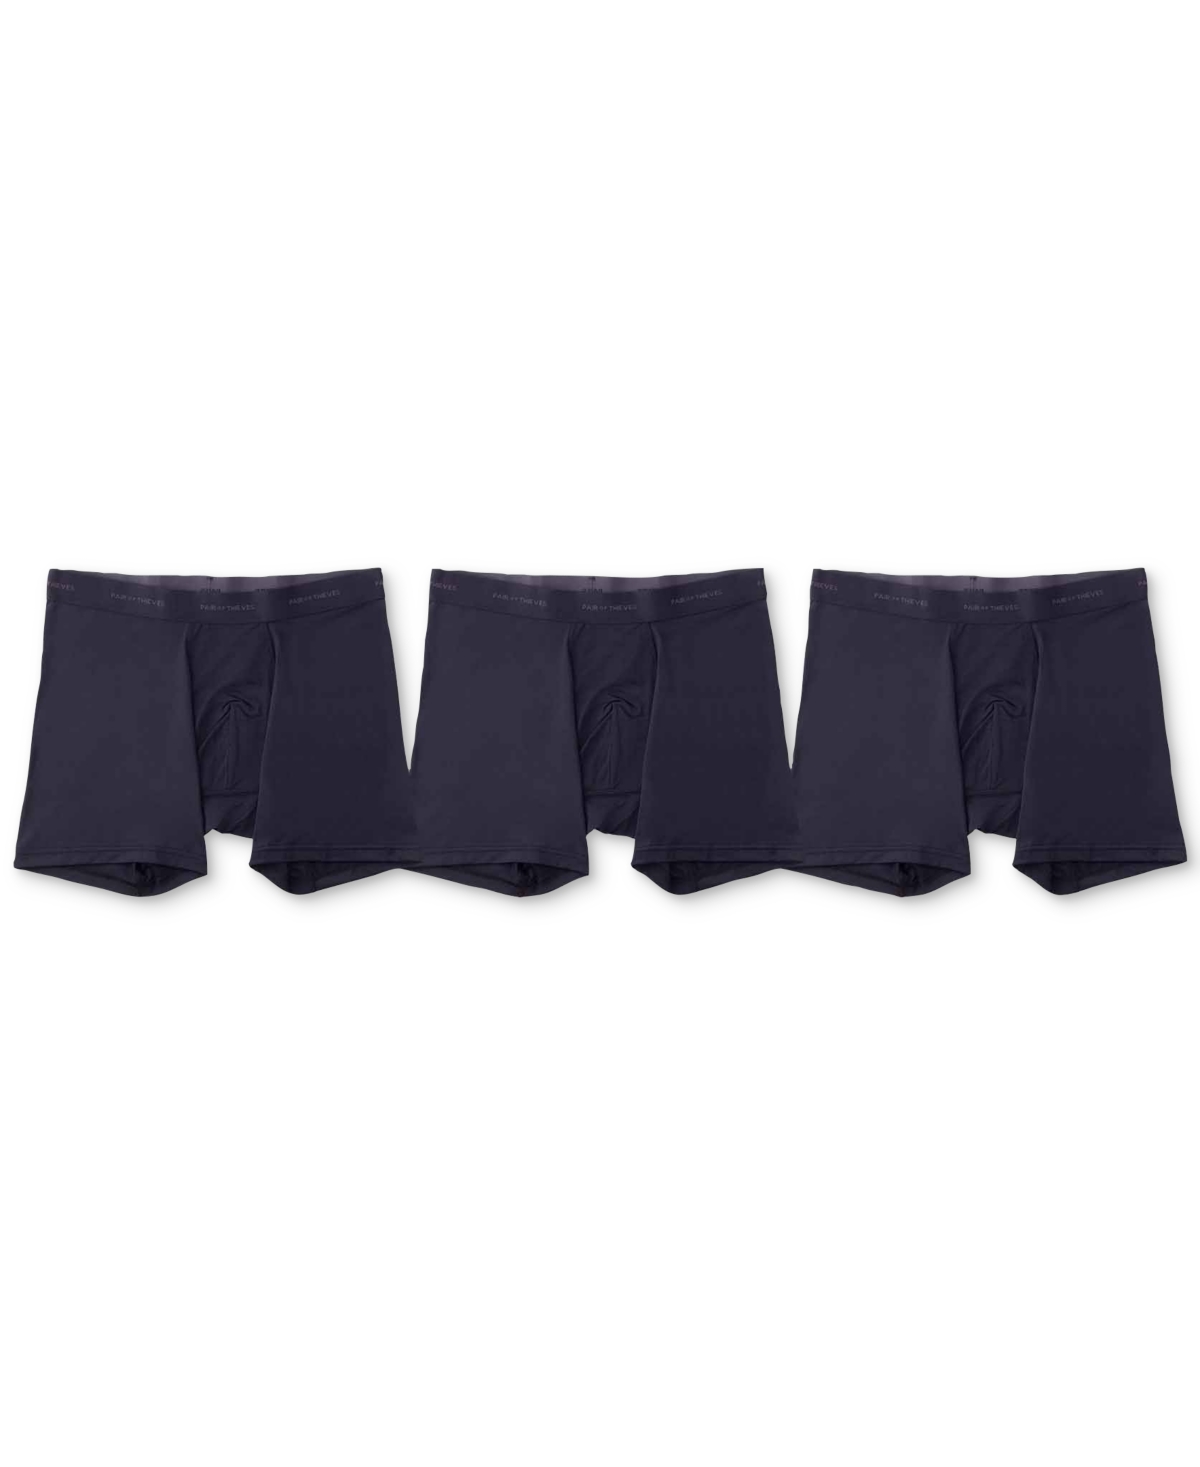 Pair Of Thieves Men's Quick Dry 3-pk. Action Blend 5" Boxer Briefs In Black